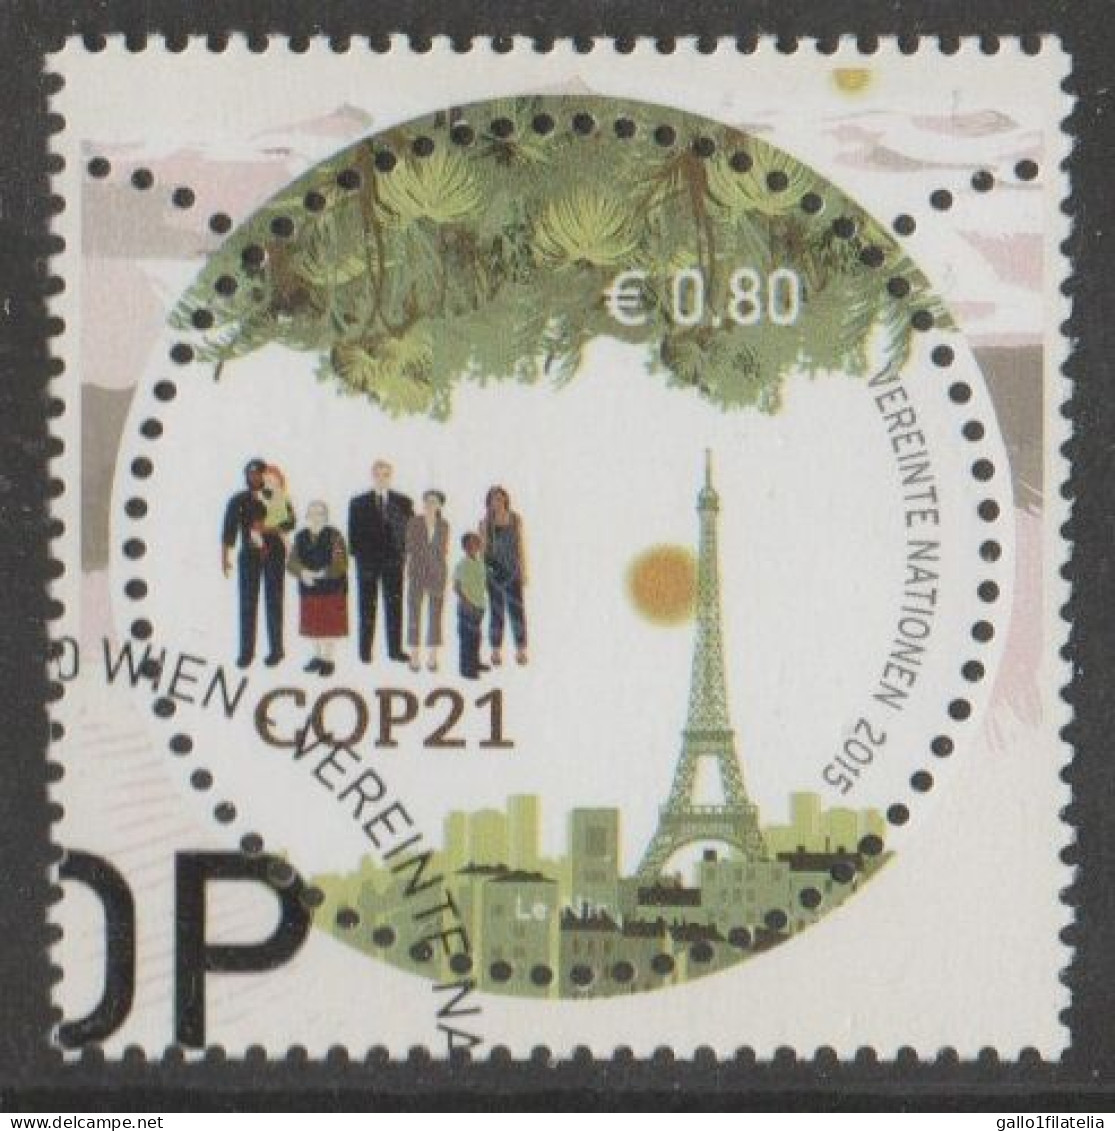 2015 - O.N.U. / UNITED NATIONS - VIENNA / WIEN - COP21. USATO - Used Stamps